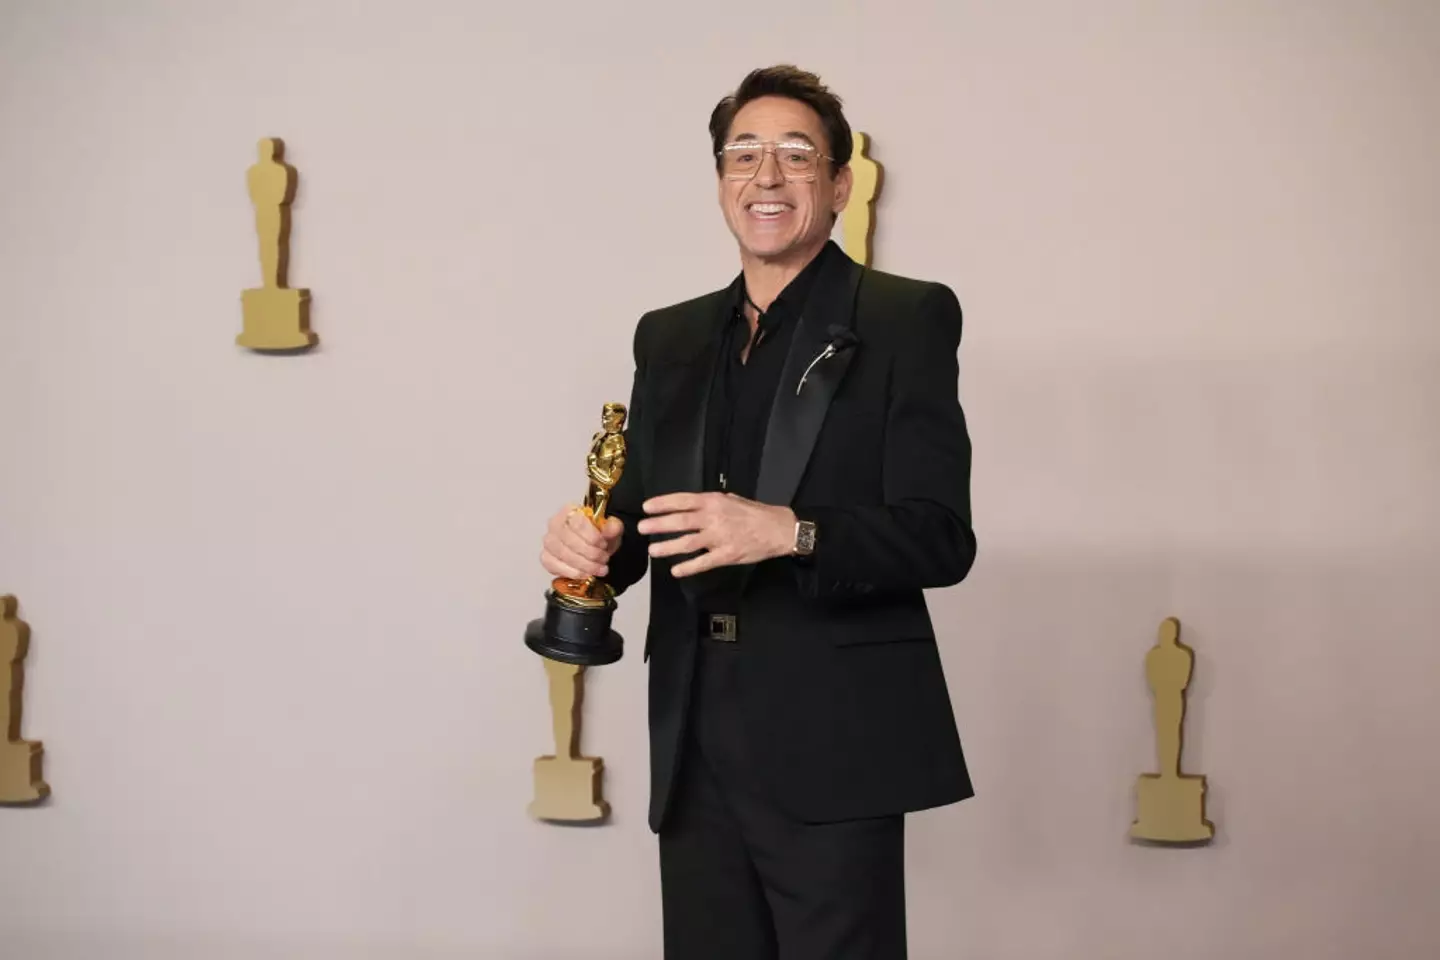 Downey Jr had the last laugh on the night, taking home the Best Supporting Actor award.